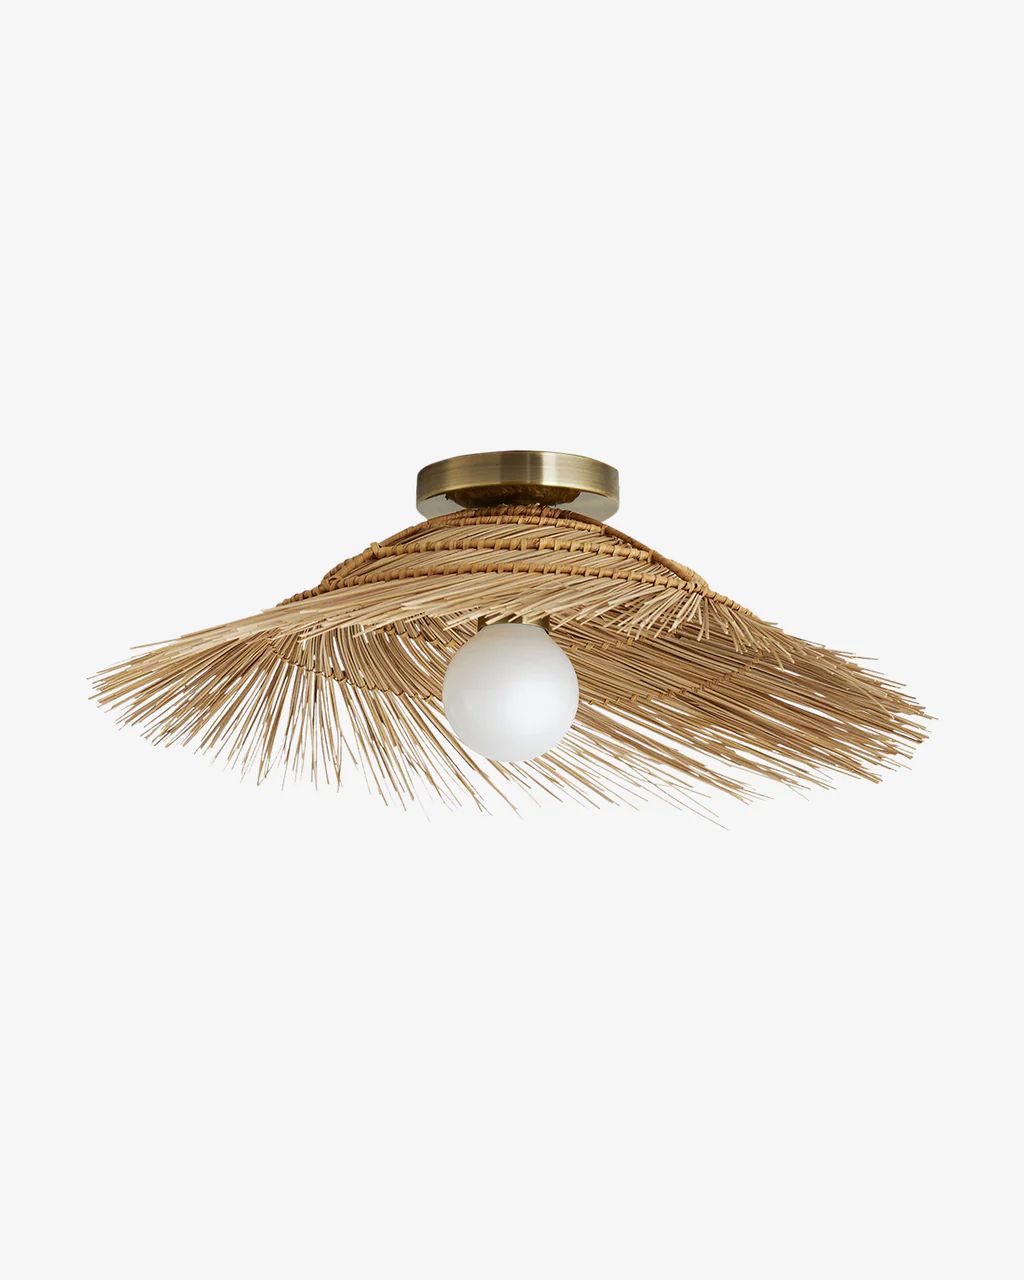 Hayes Ceiling Mount | McGee & Co.